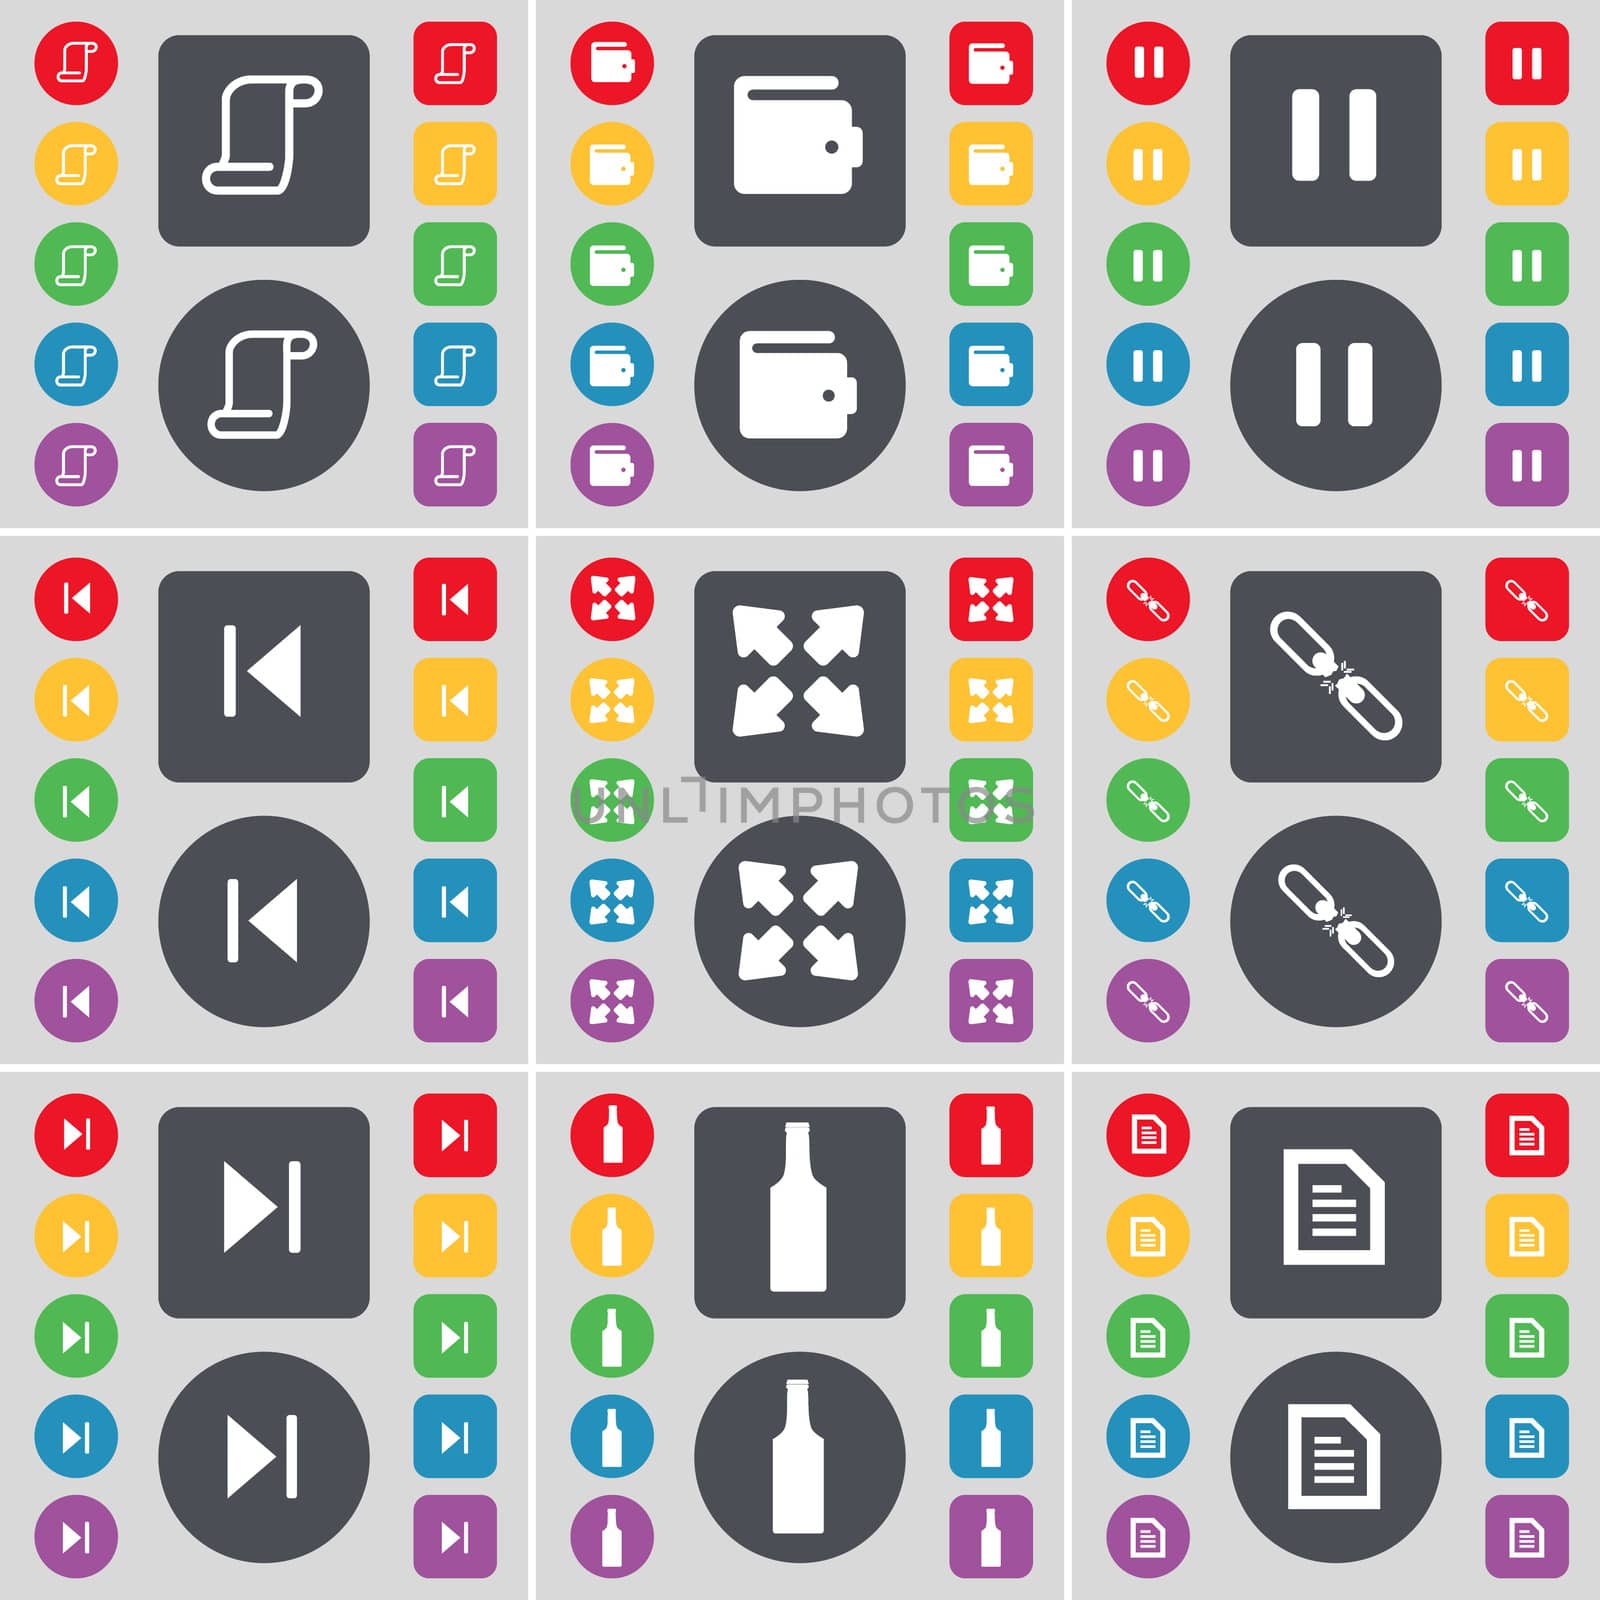 Scroll, Wallet, Pause, Media skip, Full screen, Link, Media skip, Bottle, Text file icon symbol. A large set of flat, colored buttons for your design. illustration